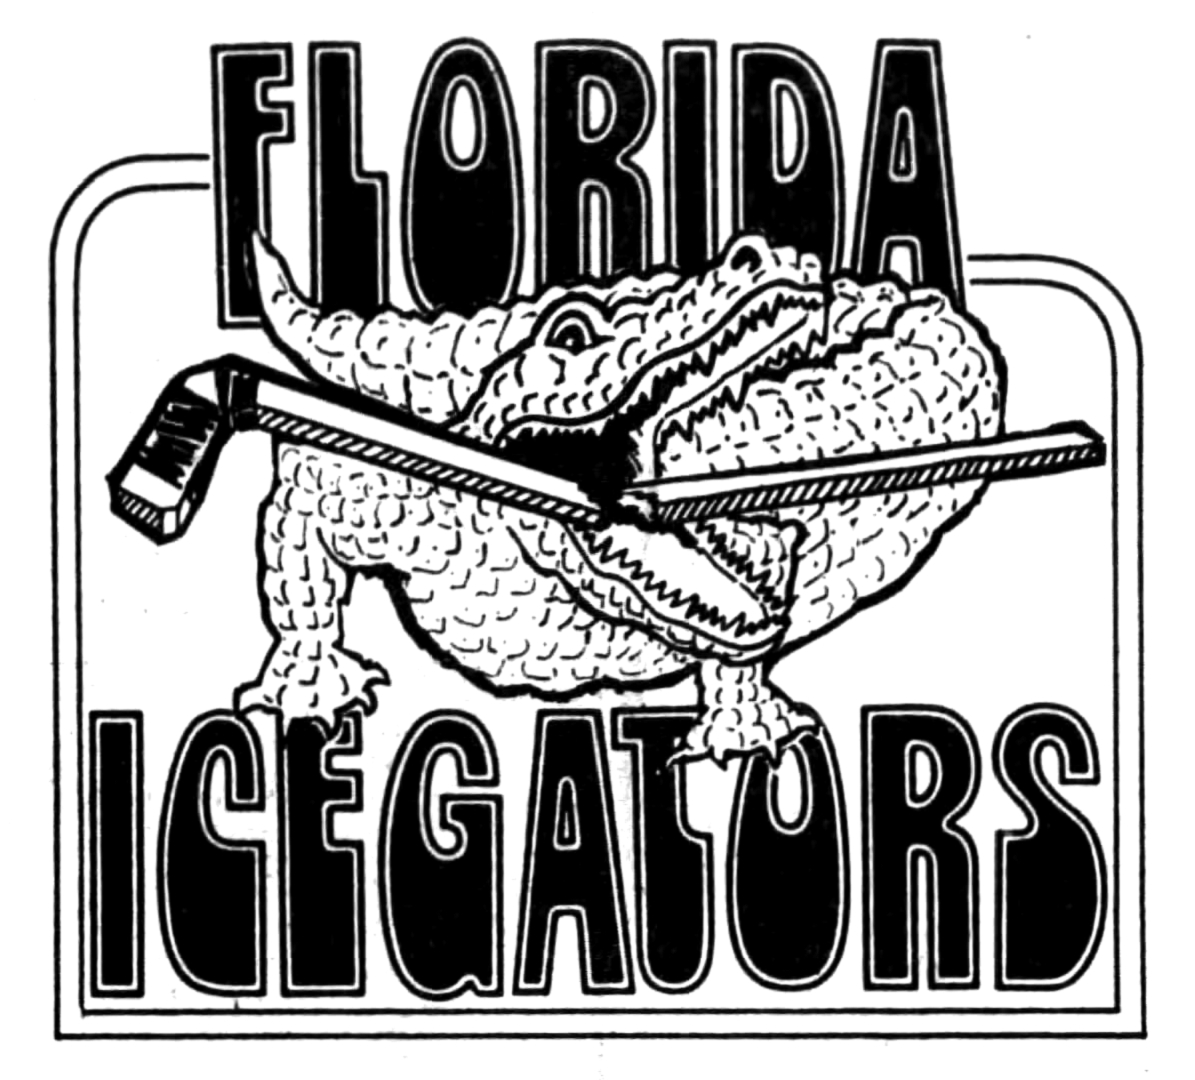 This Day In Hockey History-May 7, 1986-Jerry Saperstein Almost Brought Hockey to Florida with Miami Screaming Eagles, Florida Ice Gators